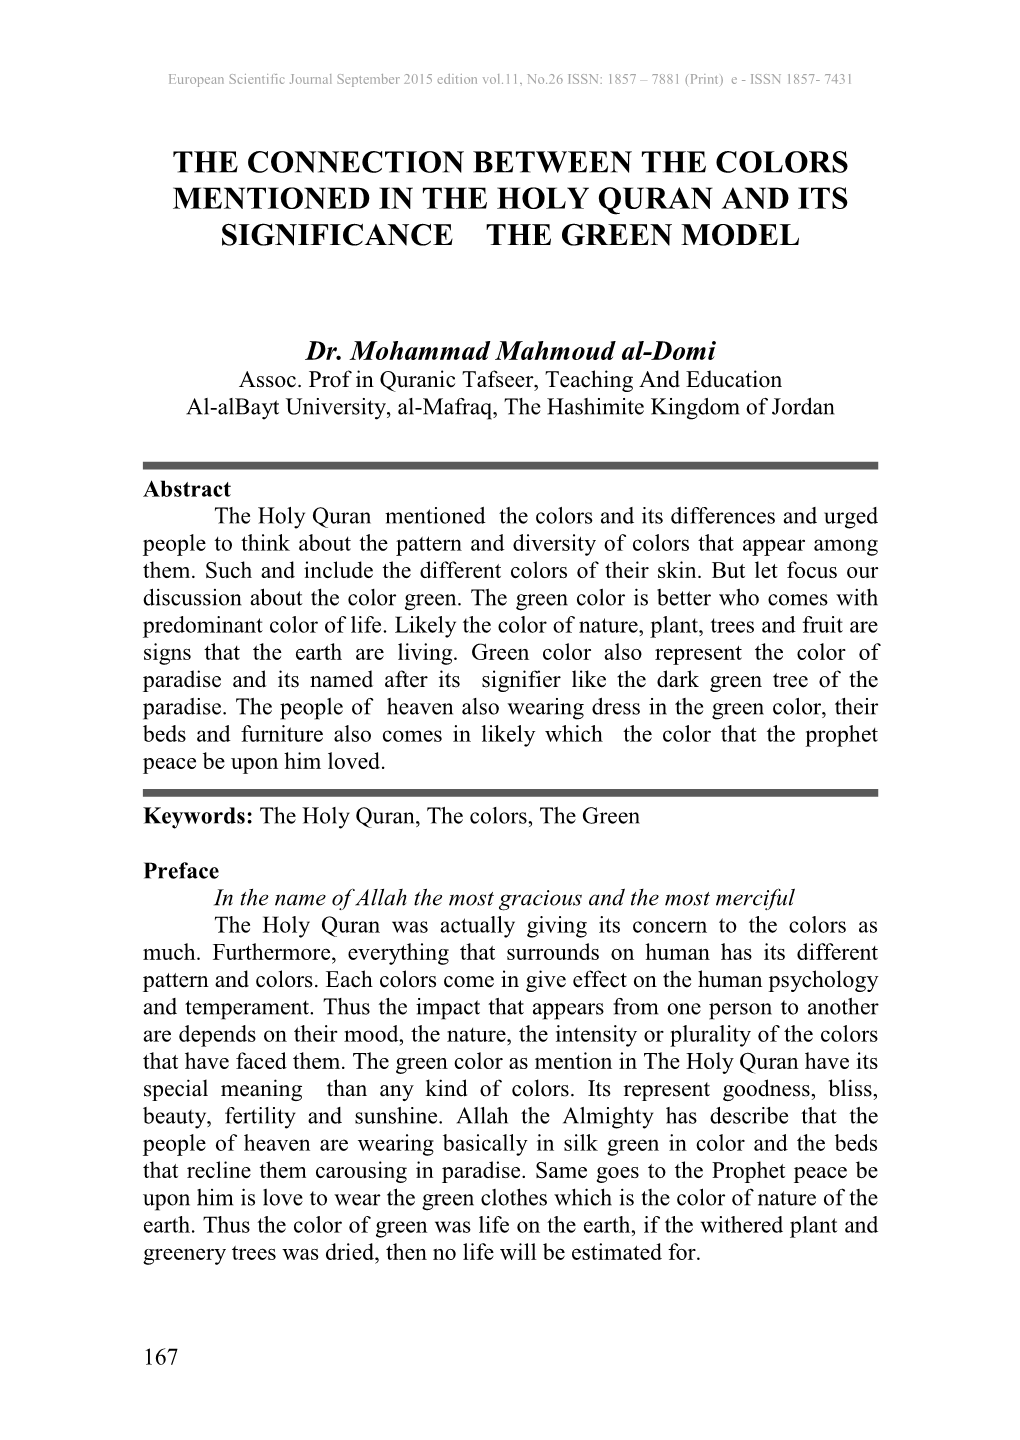 The Connection Between the Colors Mentioned in the Holy Quran and Its Significance the Green Model